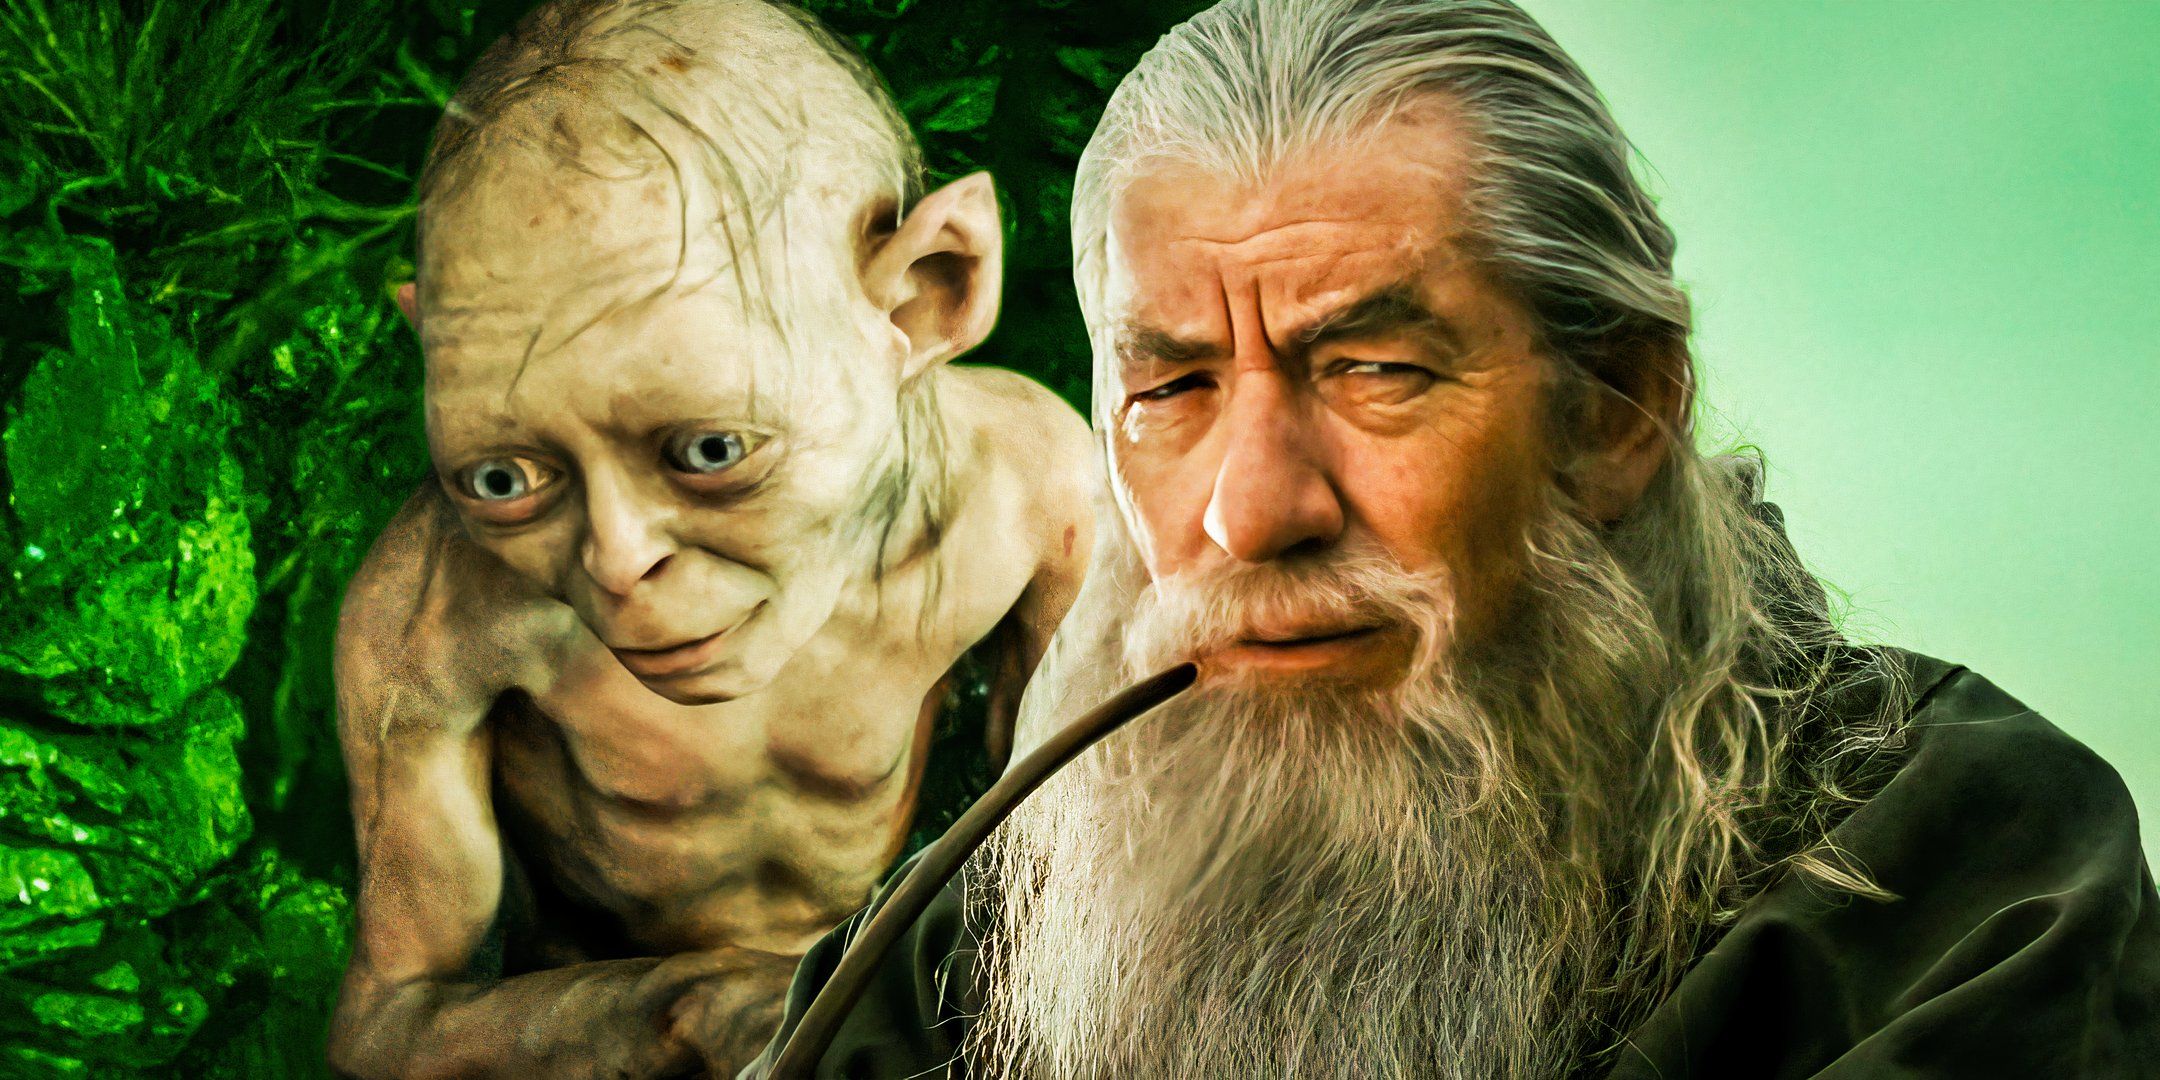 Gandalf and Gollum from The Lord of the Rings